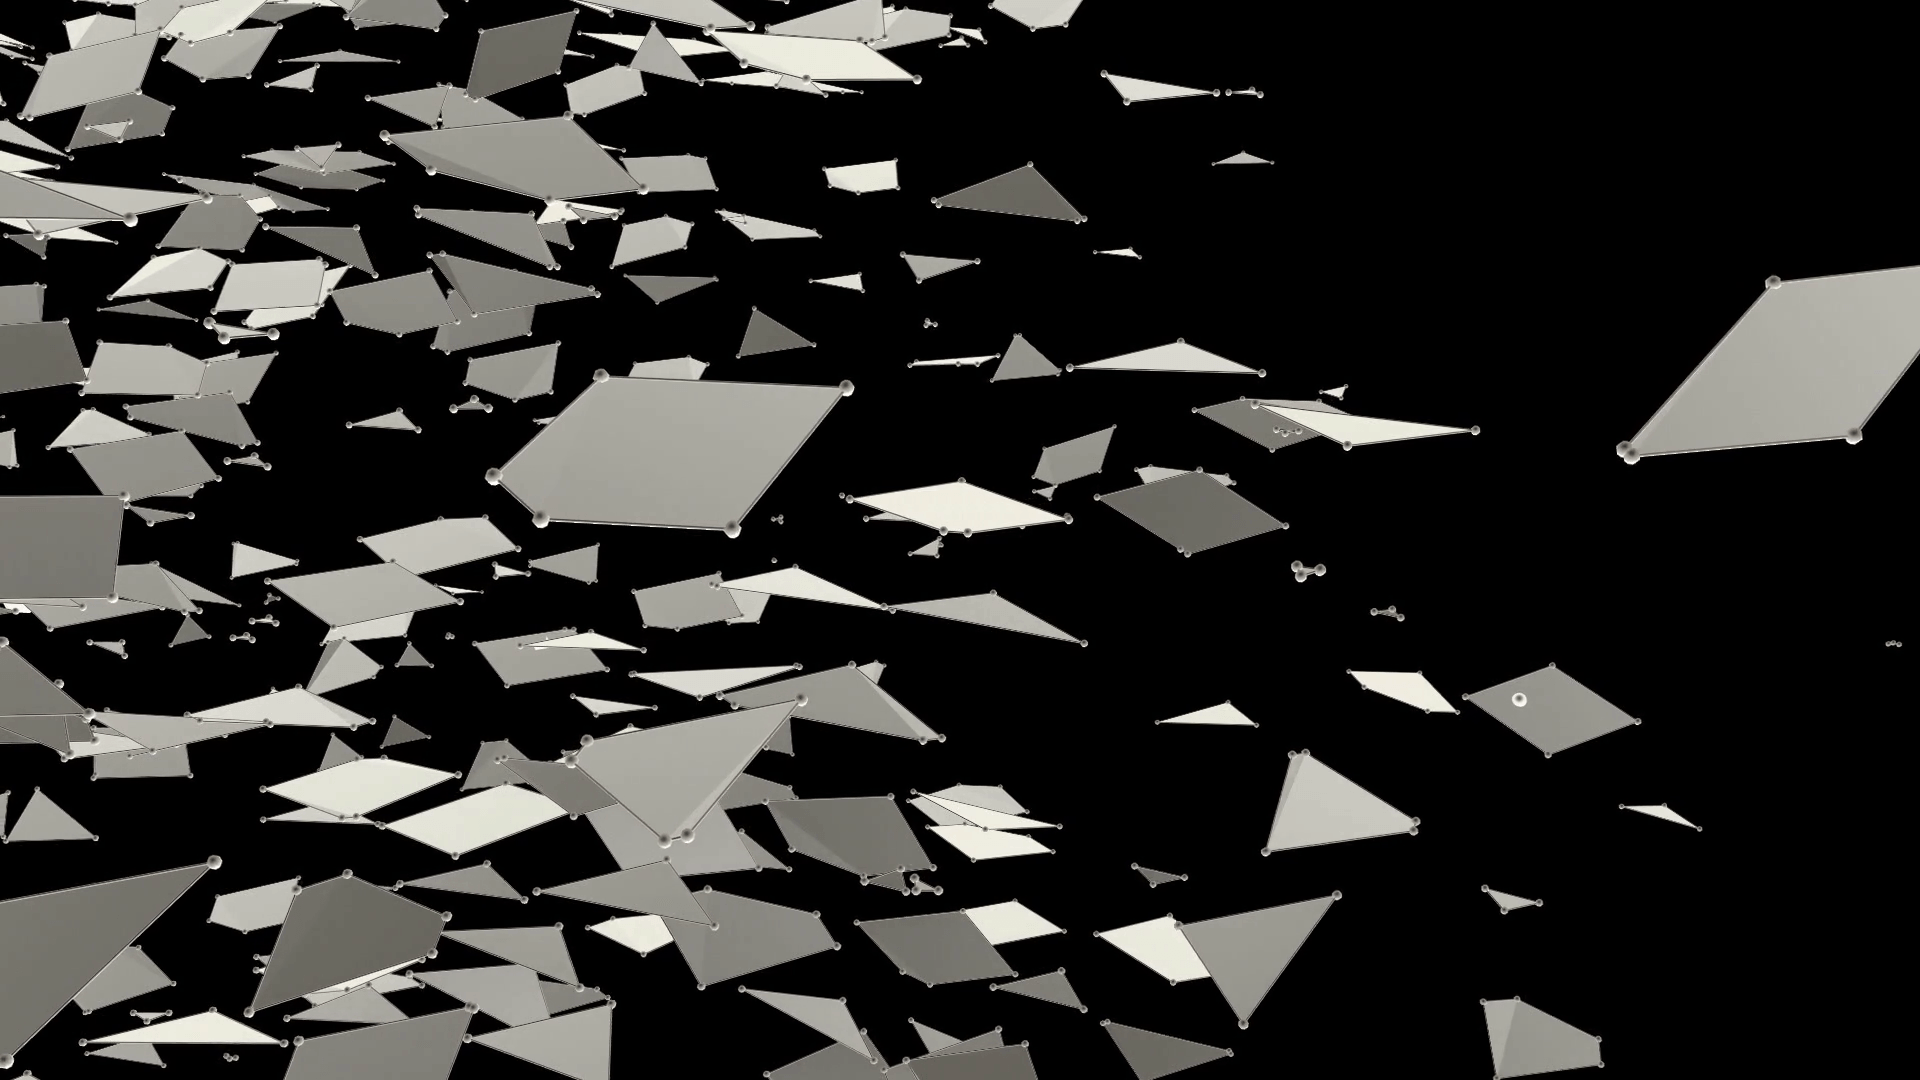 Abstract simple black and white waving 3D grid or mesh as unique